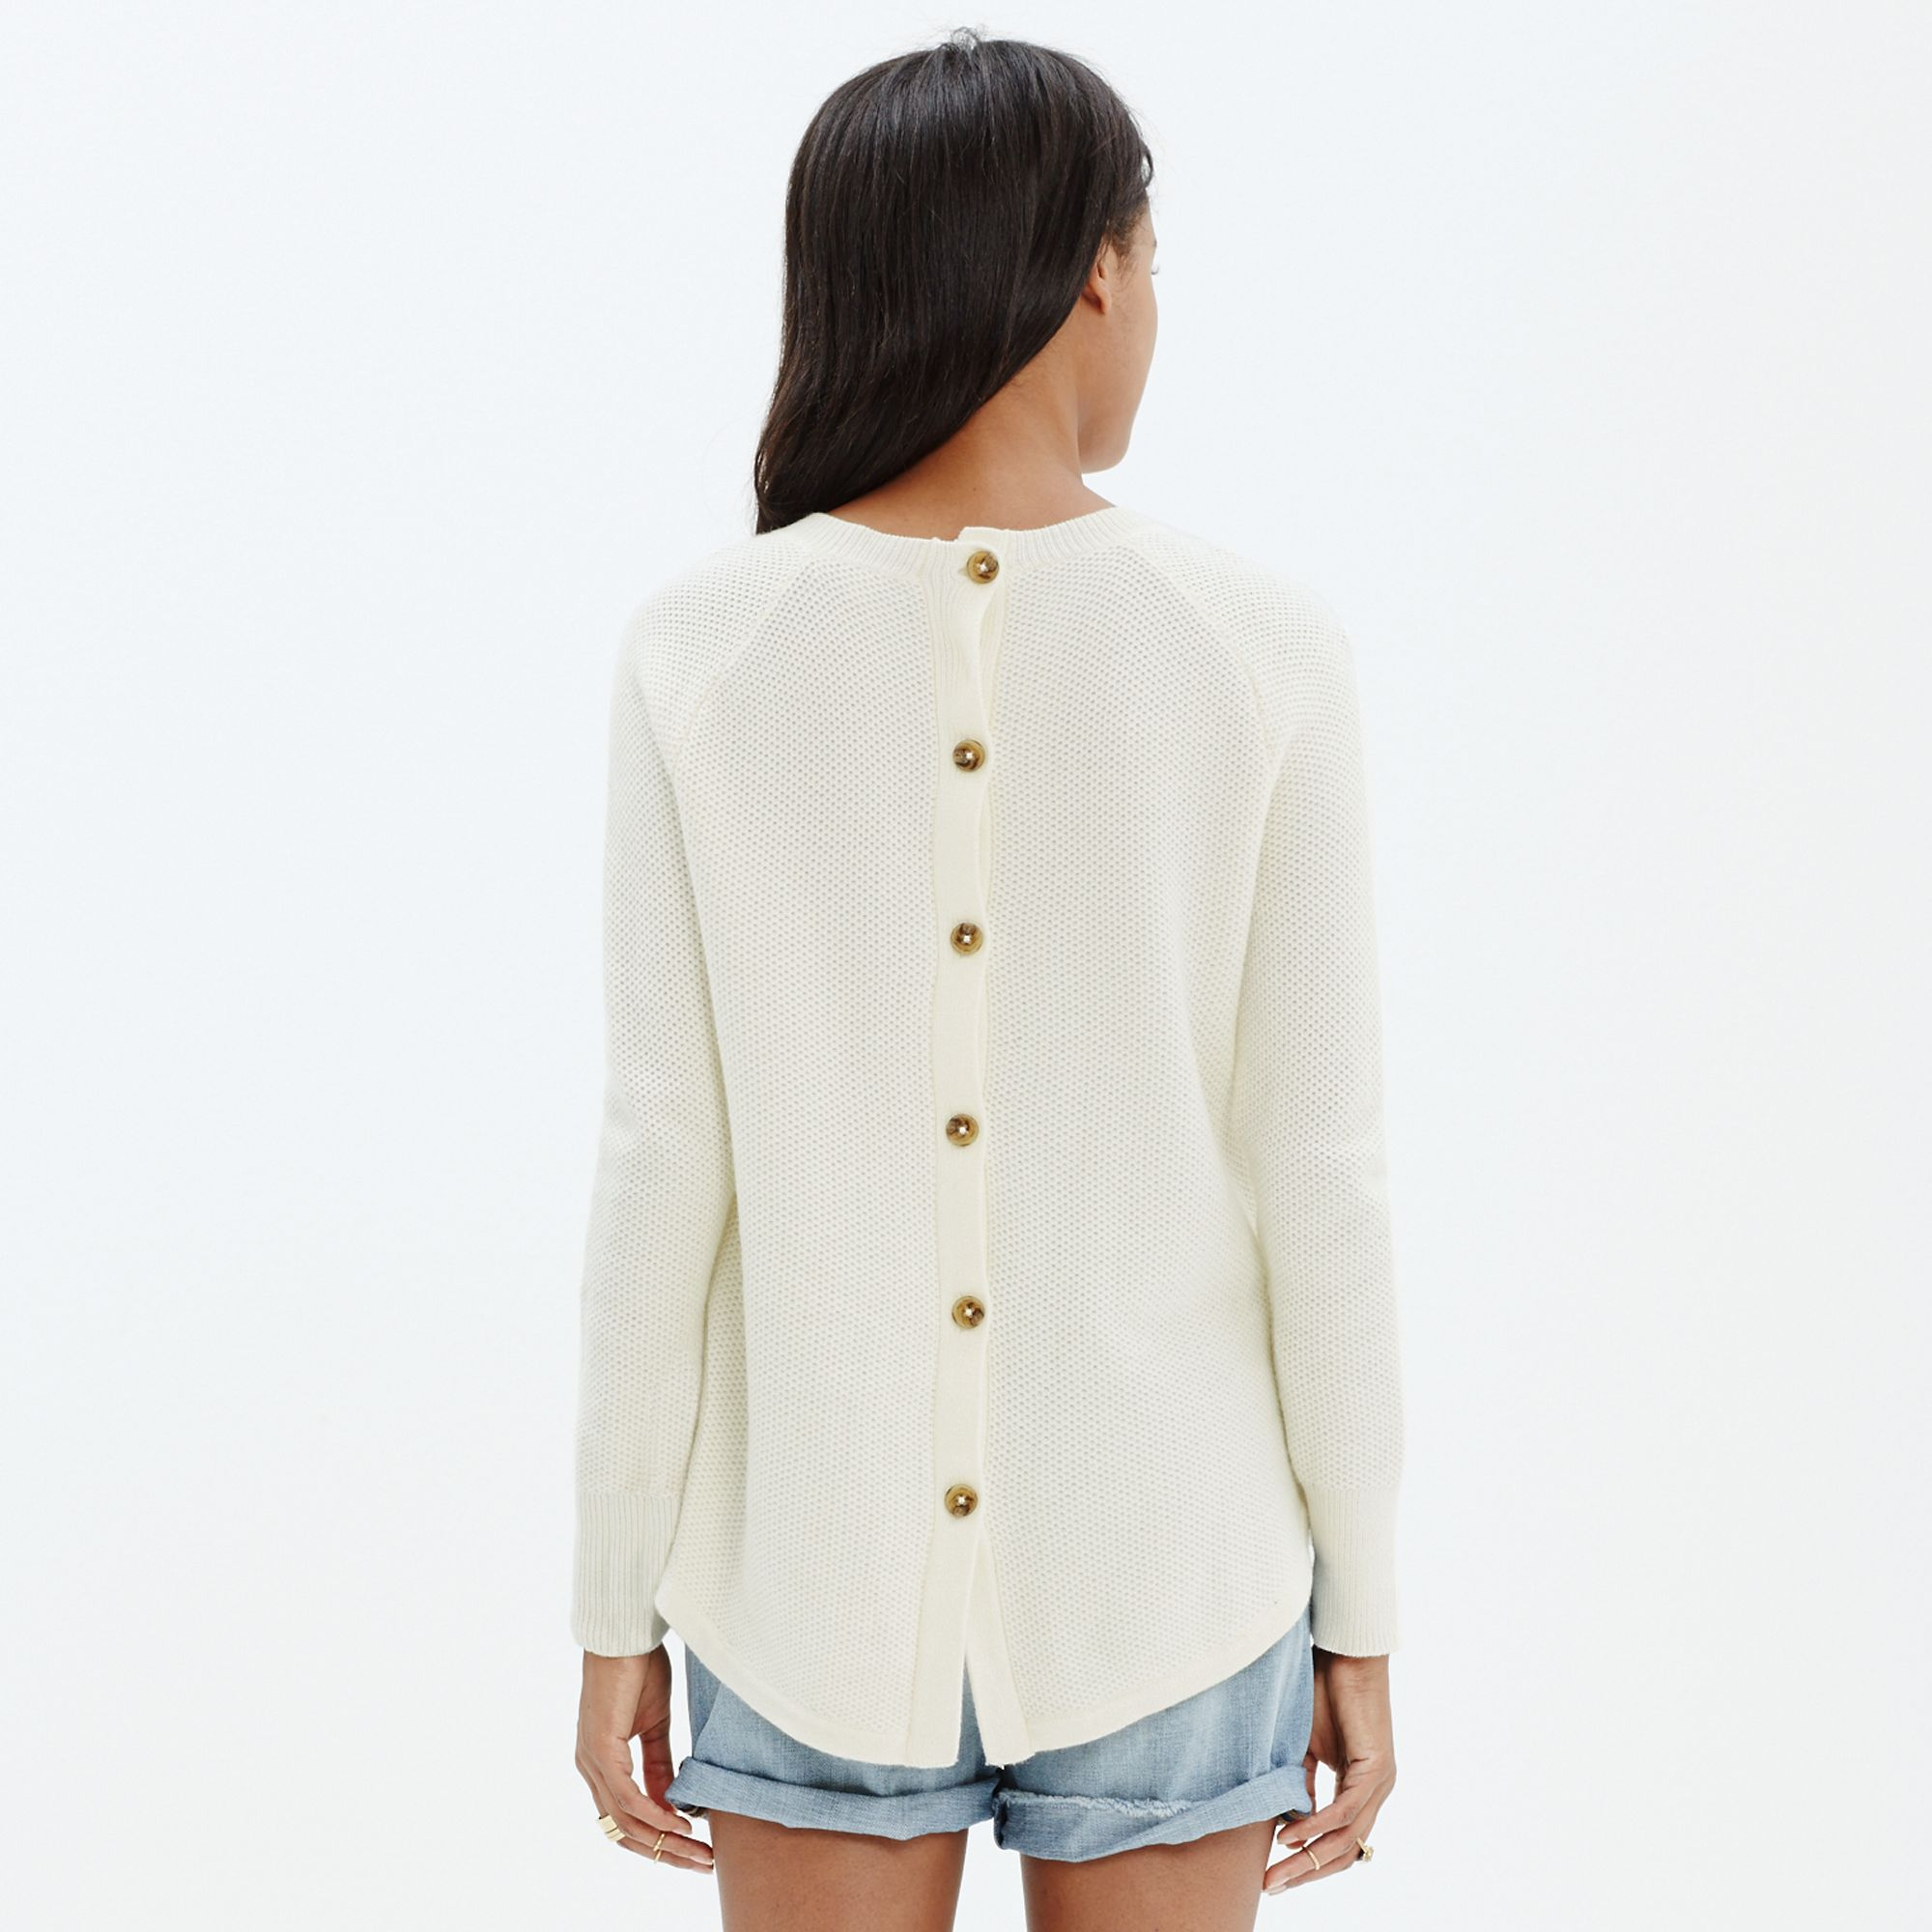 Lyst - Madewell Button-Back Sweater in Natural